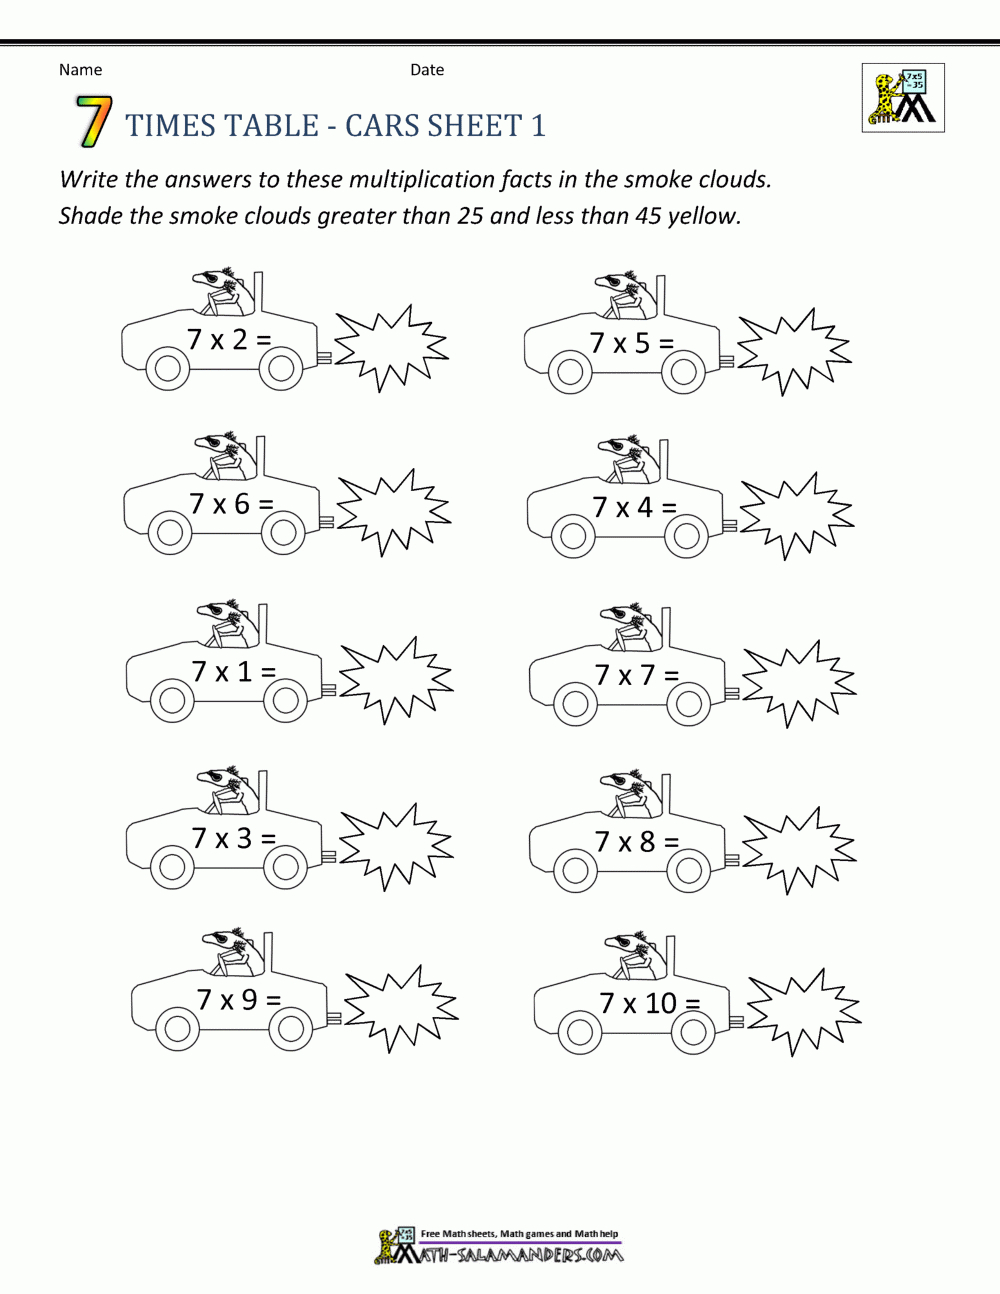 Free Times Table Worksheets - 7 Times Table regarding Printable Multiplication Times Table